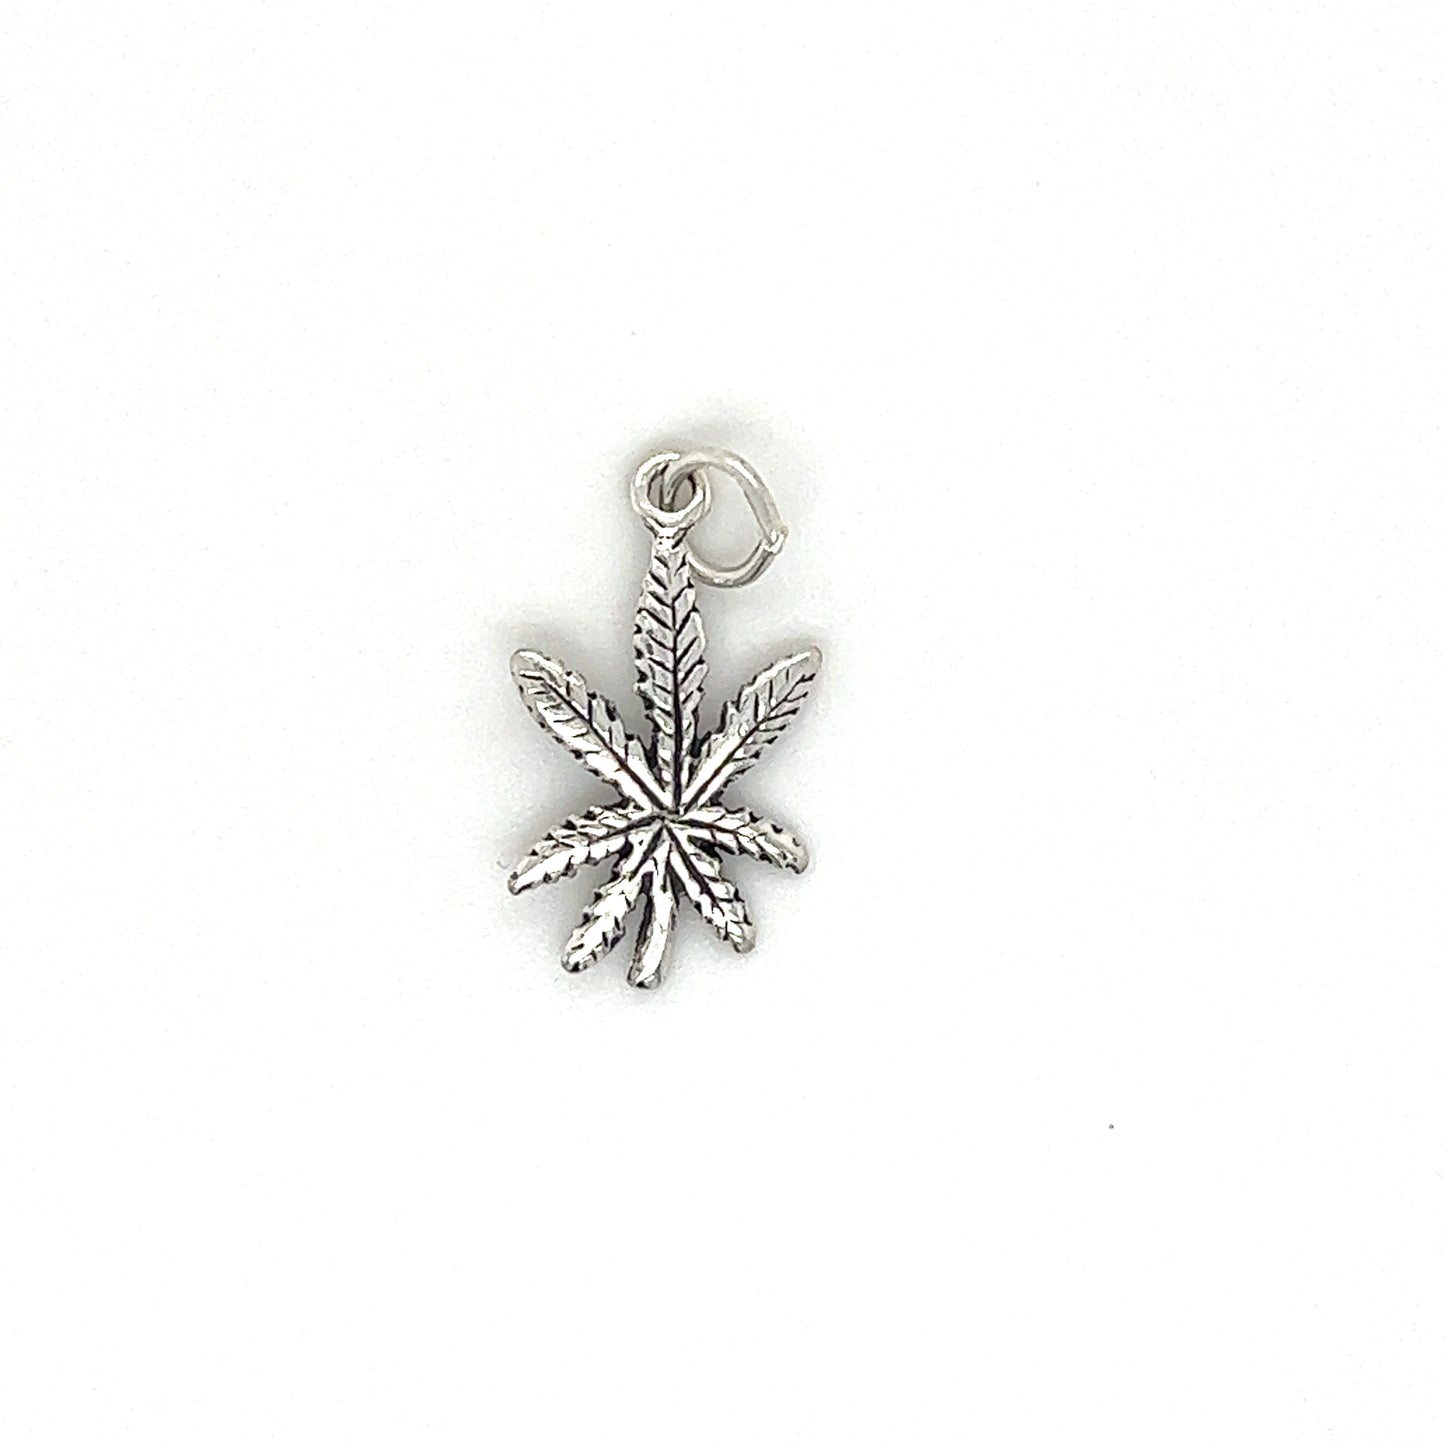 A Super Silver Tiny Mary Jane Leaf Charm on a white background.